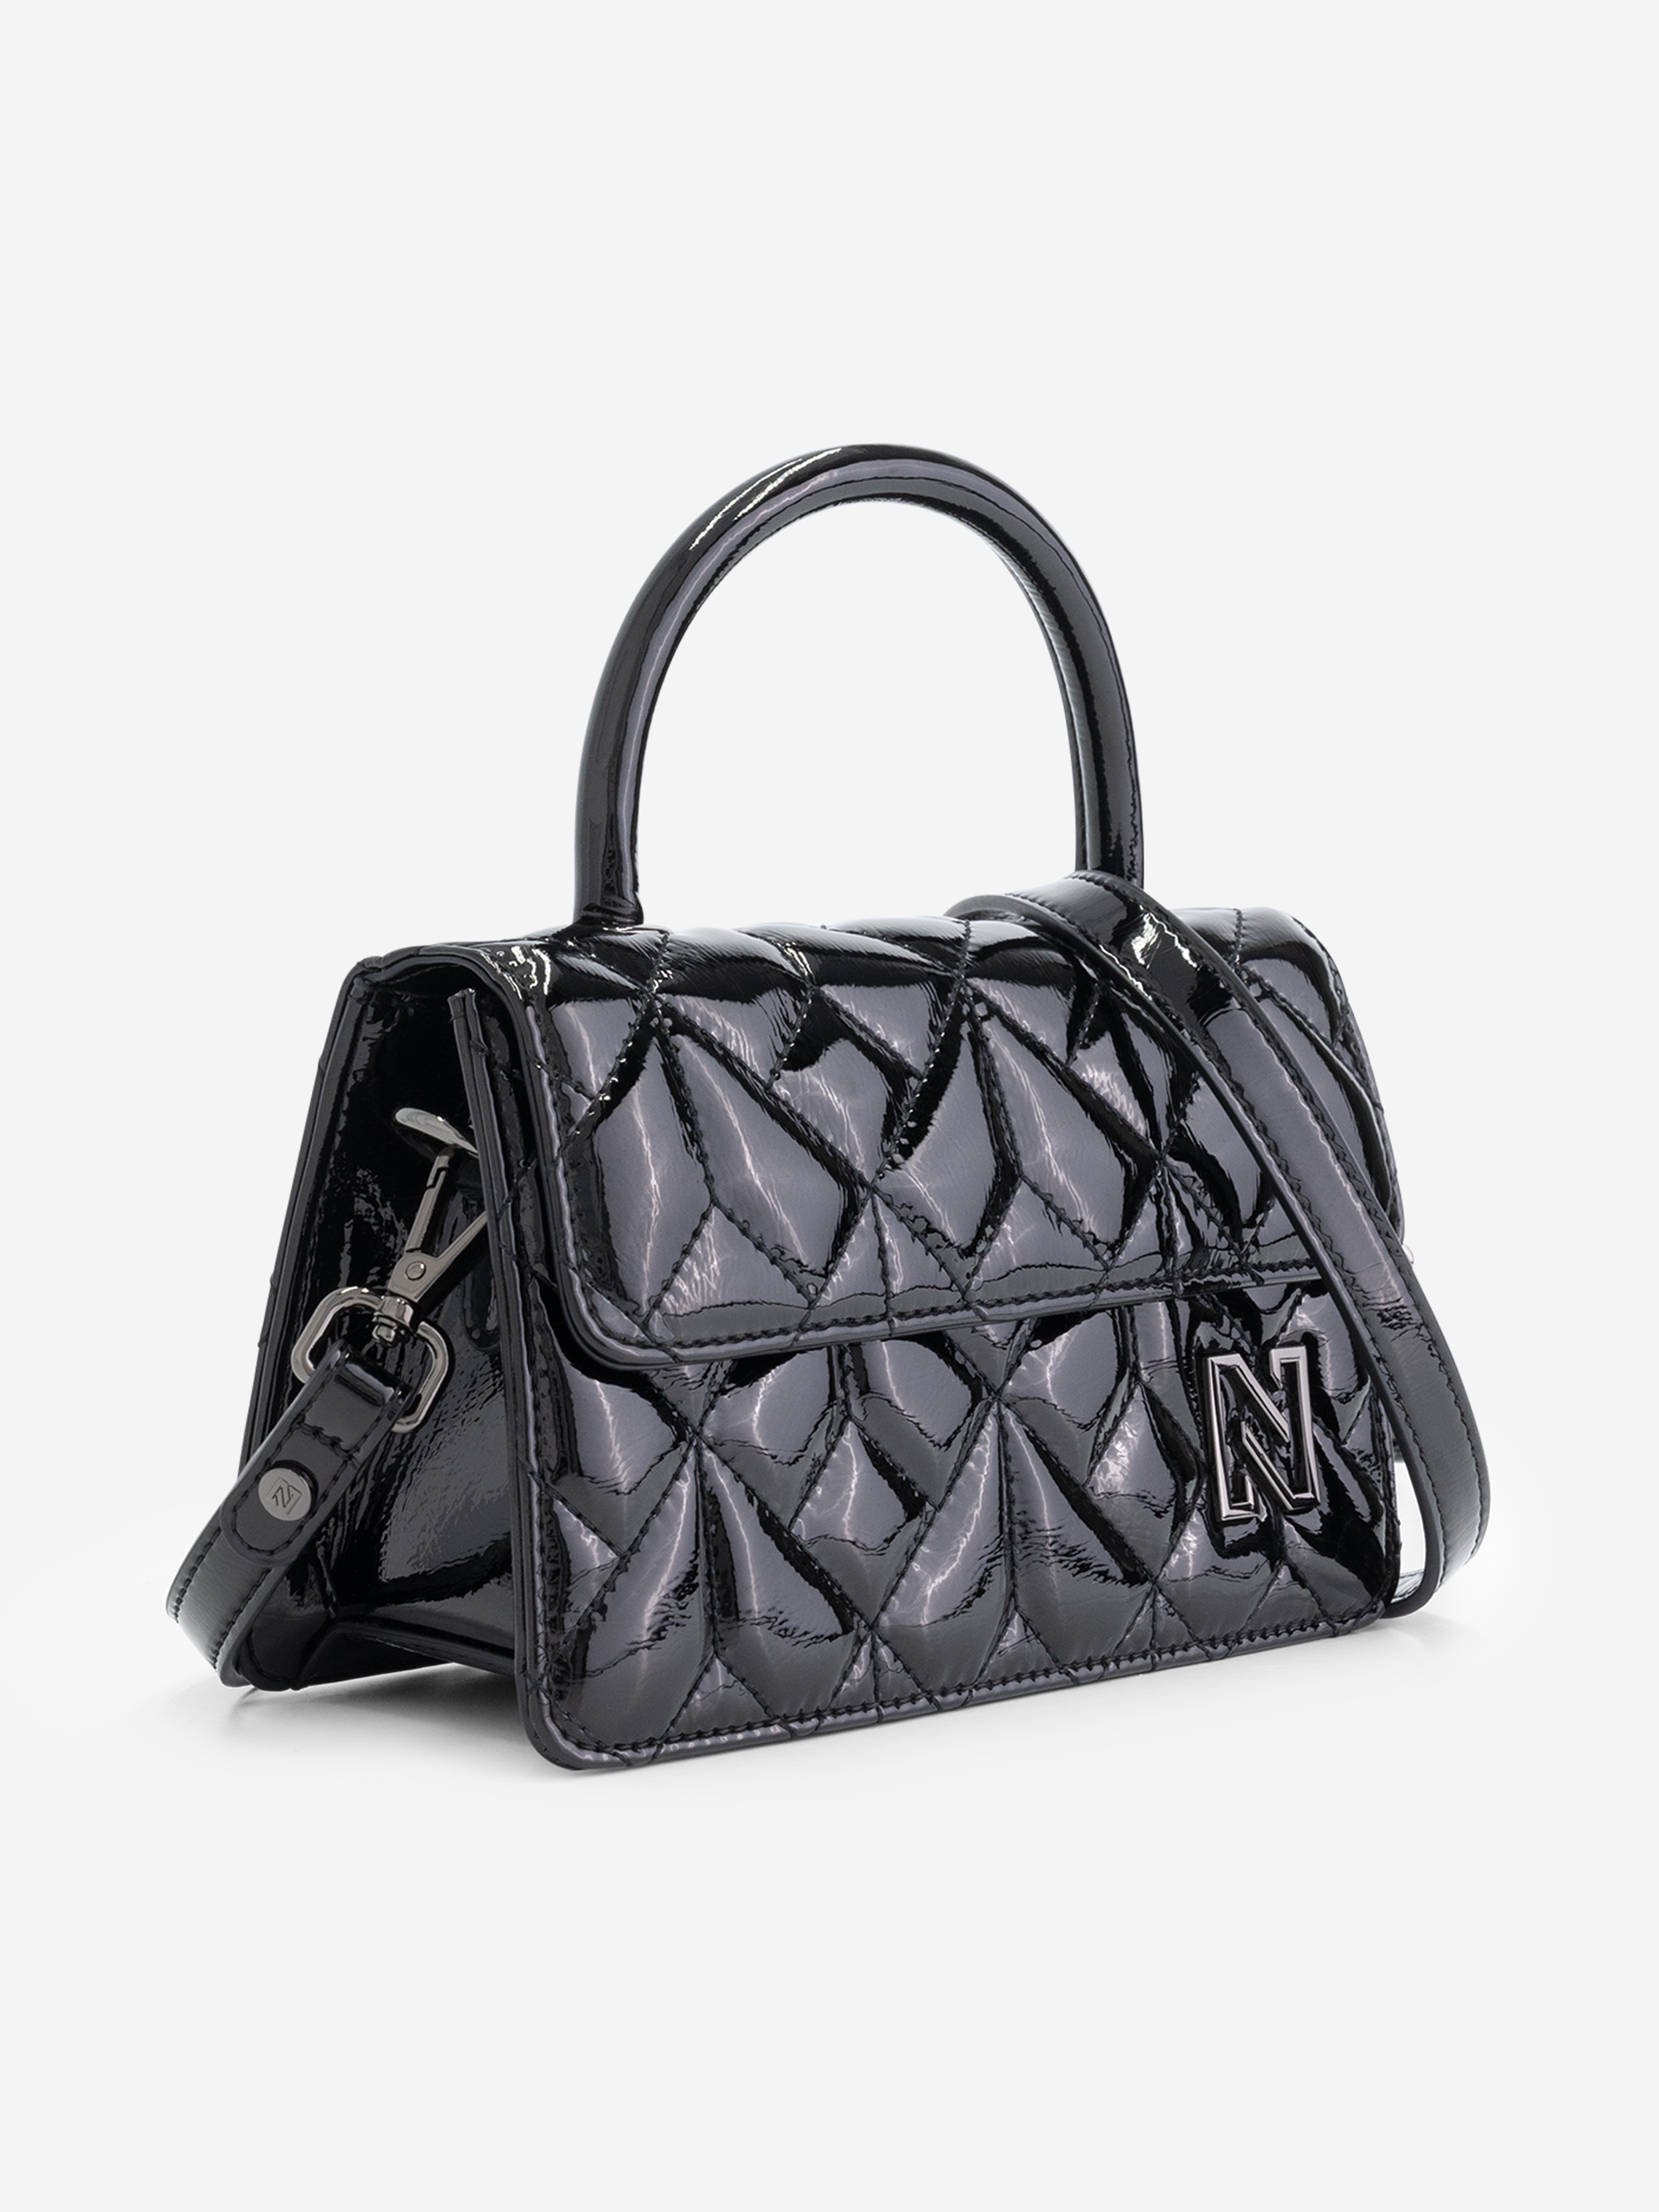 Quilted lacquer handbag